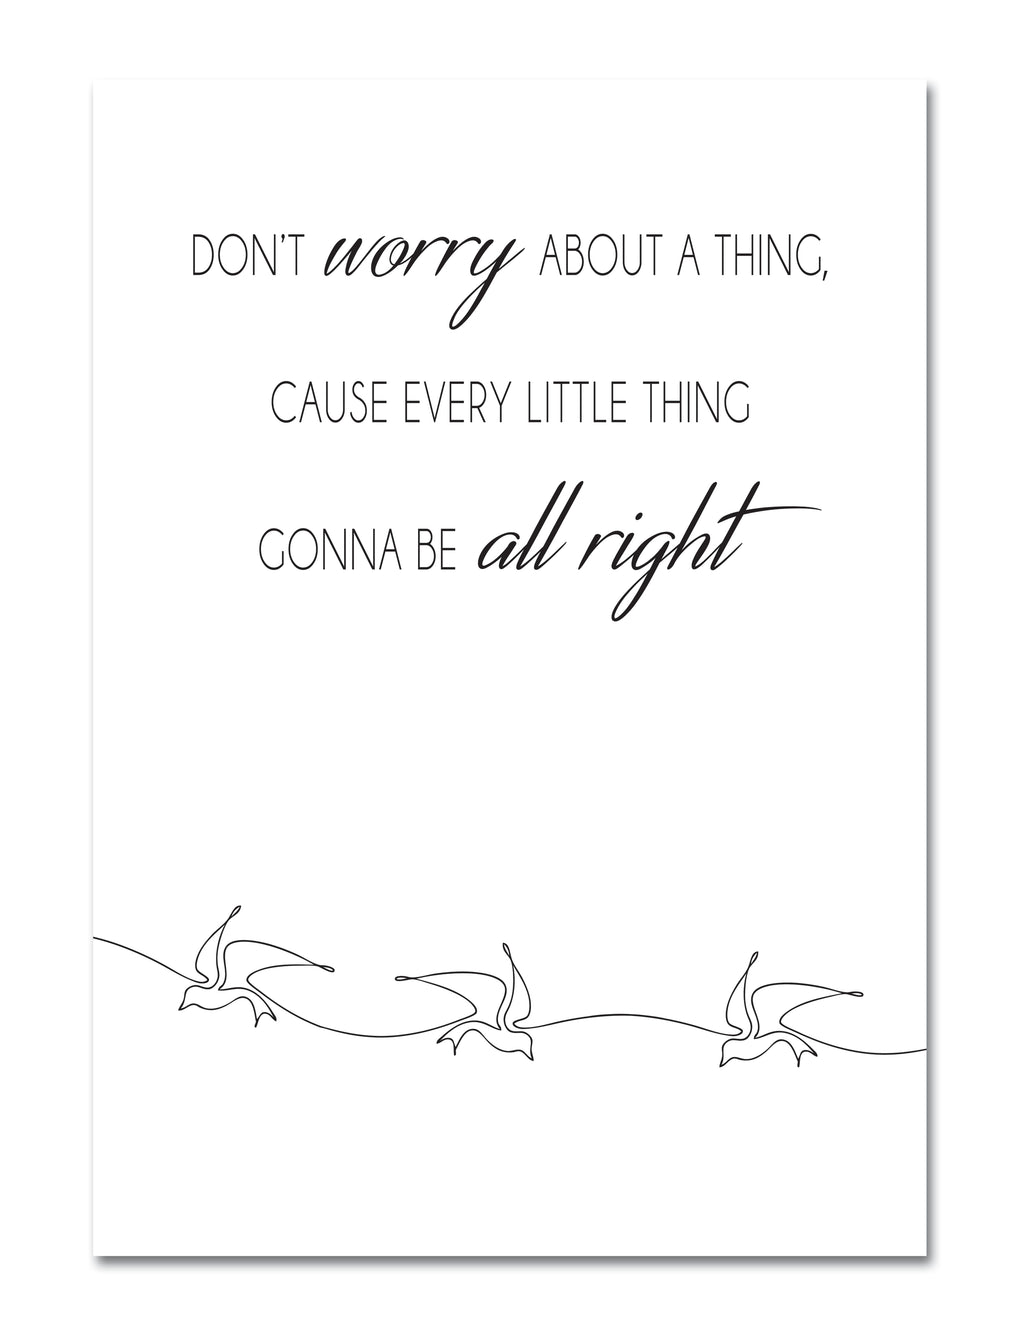 "Don't worry about a thing, cause every little thing gonna be all right"